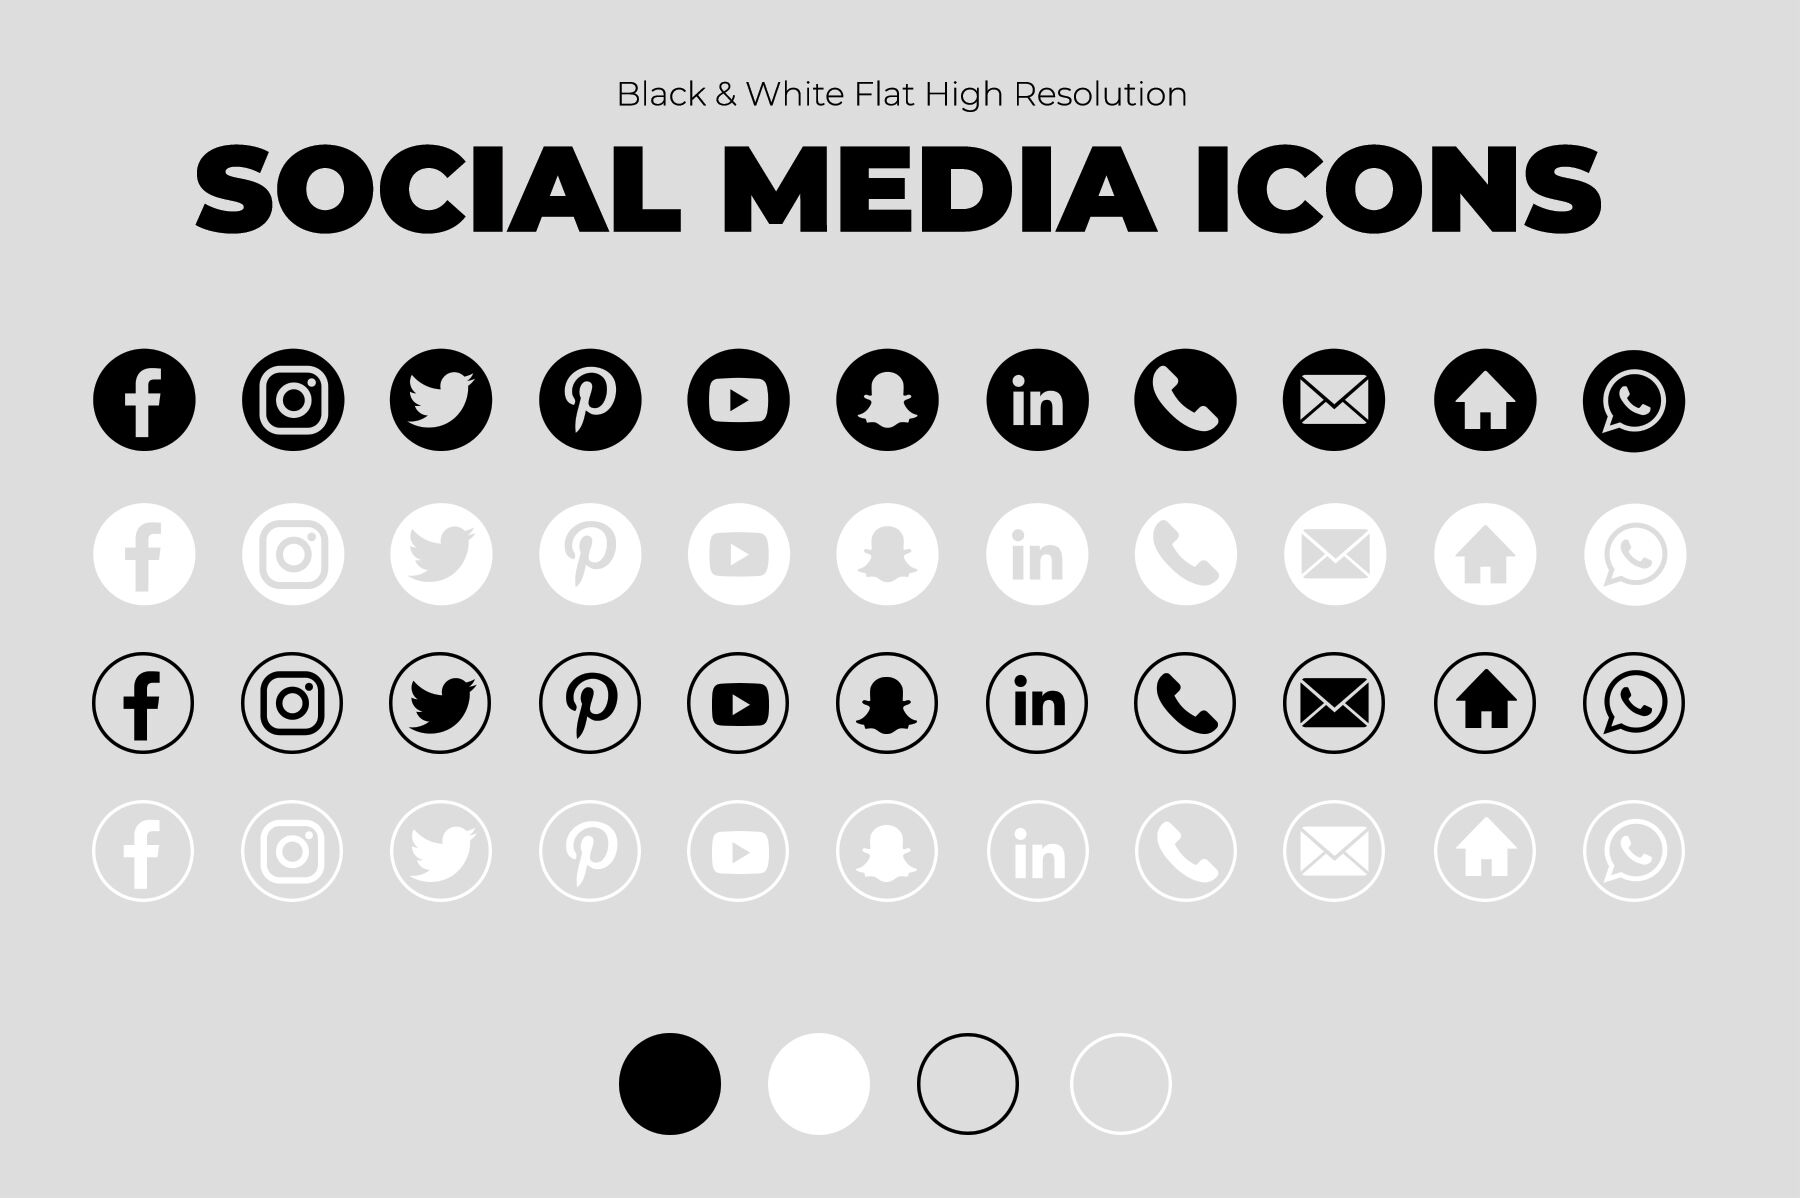 Download 11 Black & White Social Media Icons - PNG, SVG, AI, PSD By ...